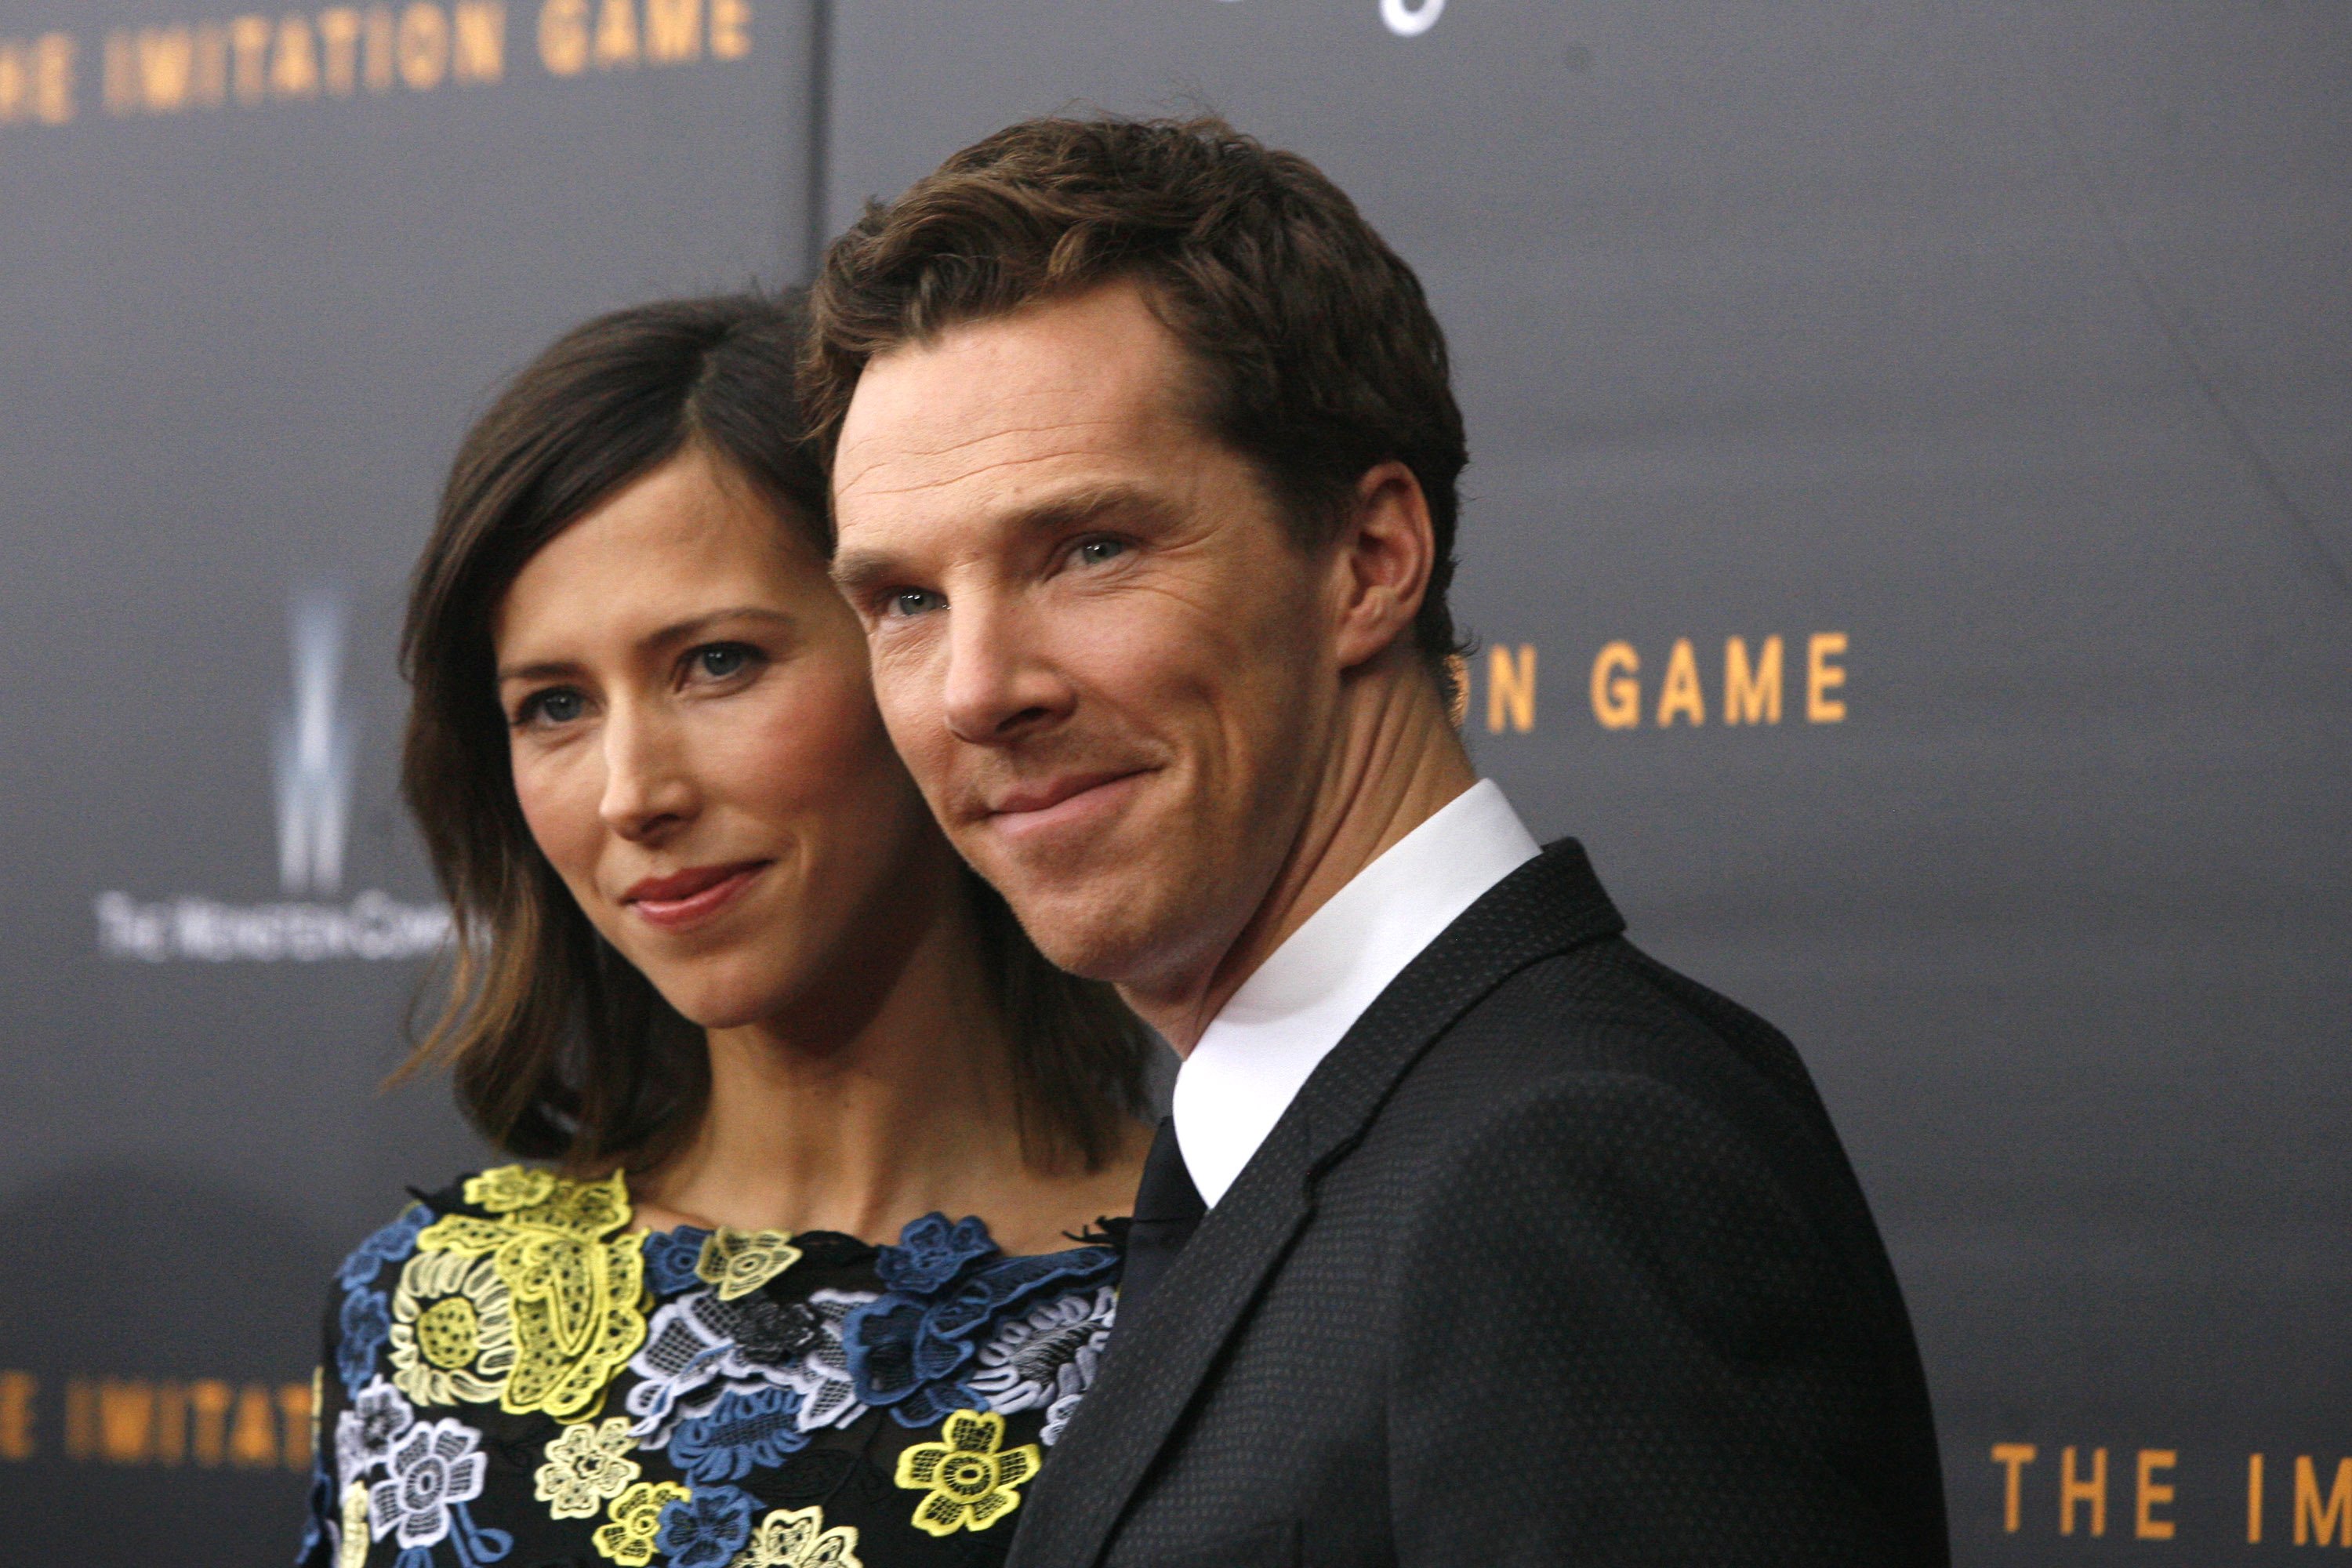 Sophie Hunter and her husband Benedict Cumberbatch attend the "The Imitation Game" premiere at Ziegfeld Theater on November 17, 2014, in New York City. | Source: Getty Images